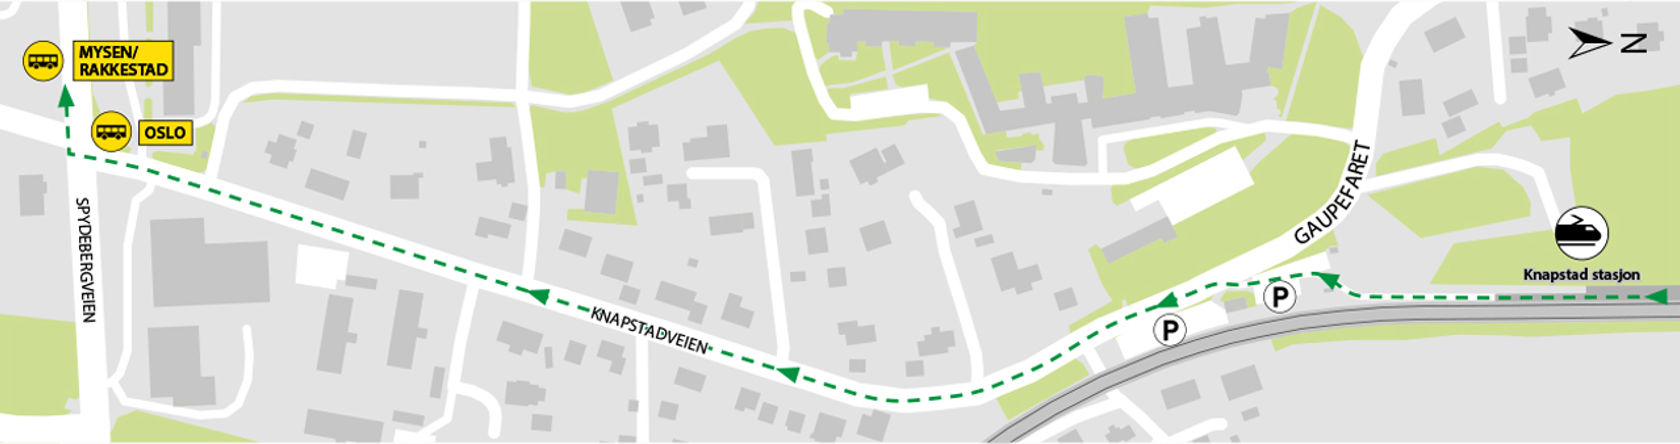 Map shows rail replacement service departs from bus stops Knapstad located in Spydebergveien. 